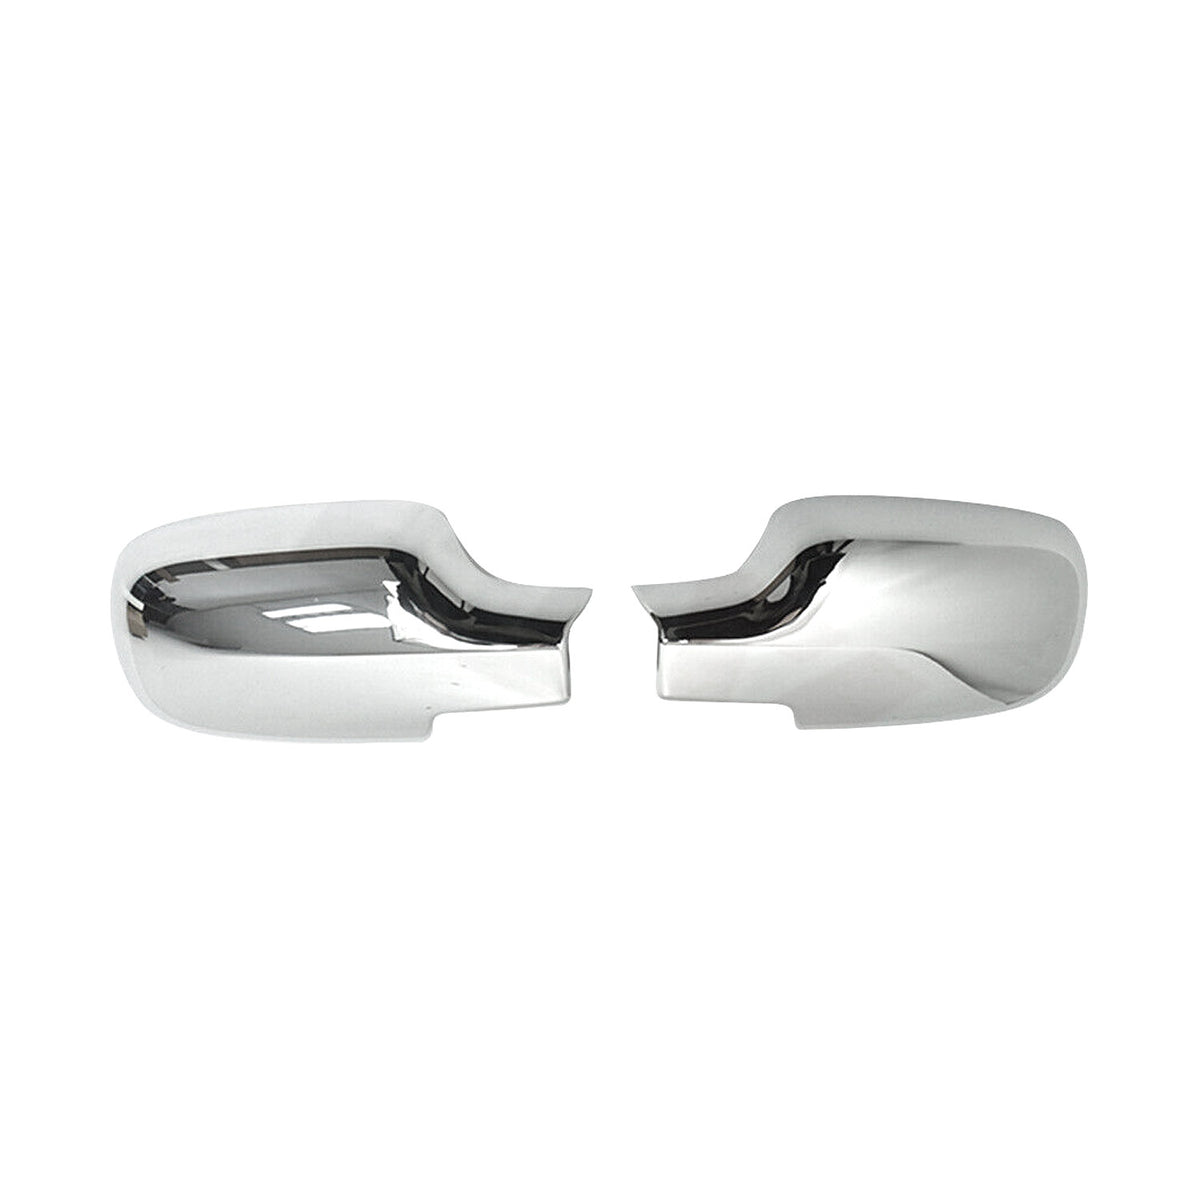 Mirror Caps Mirror Cover for Renault Scenic 2003-2009 Chrome ABS Silver